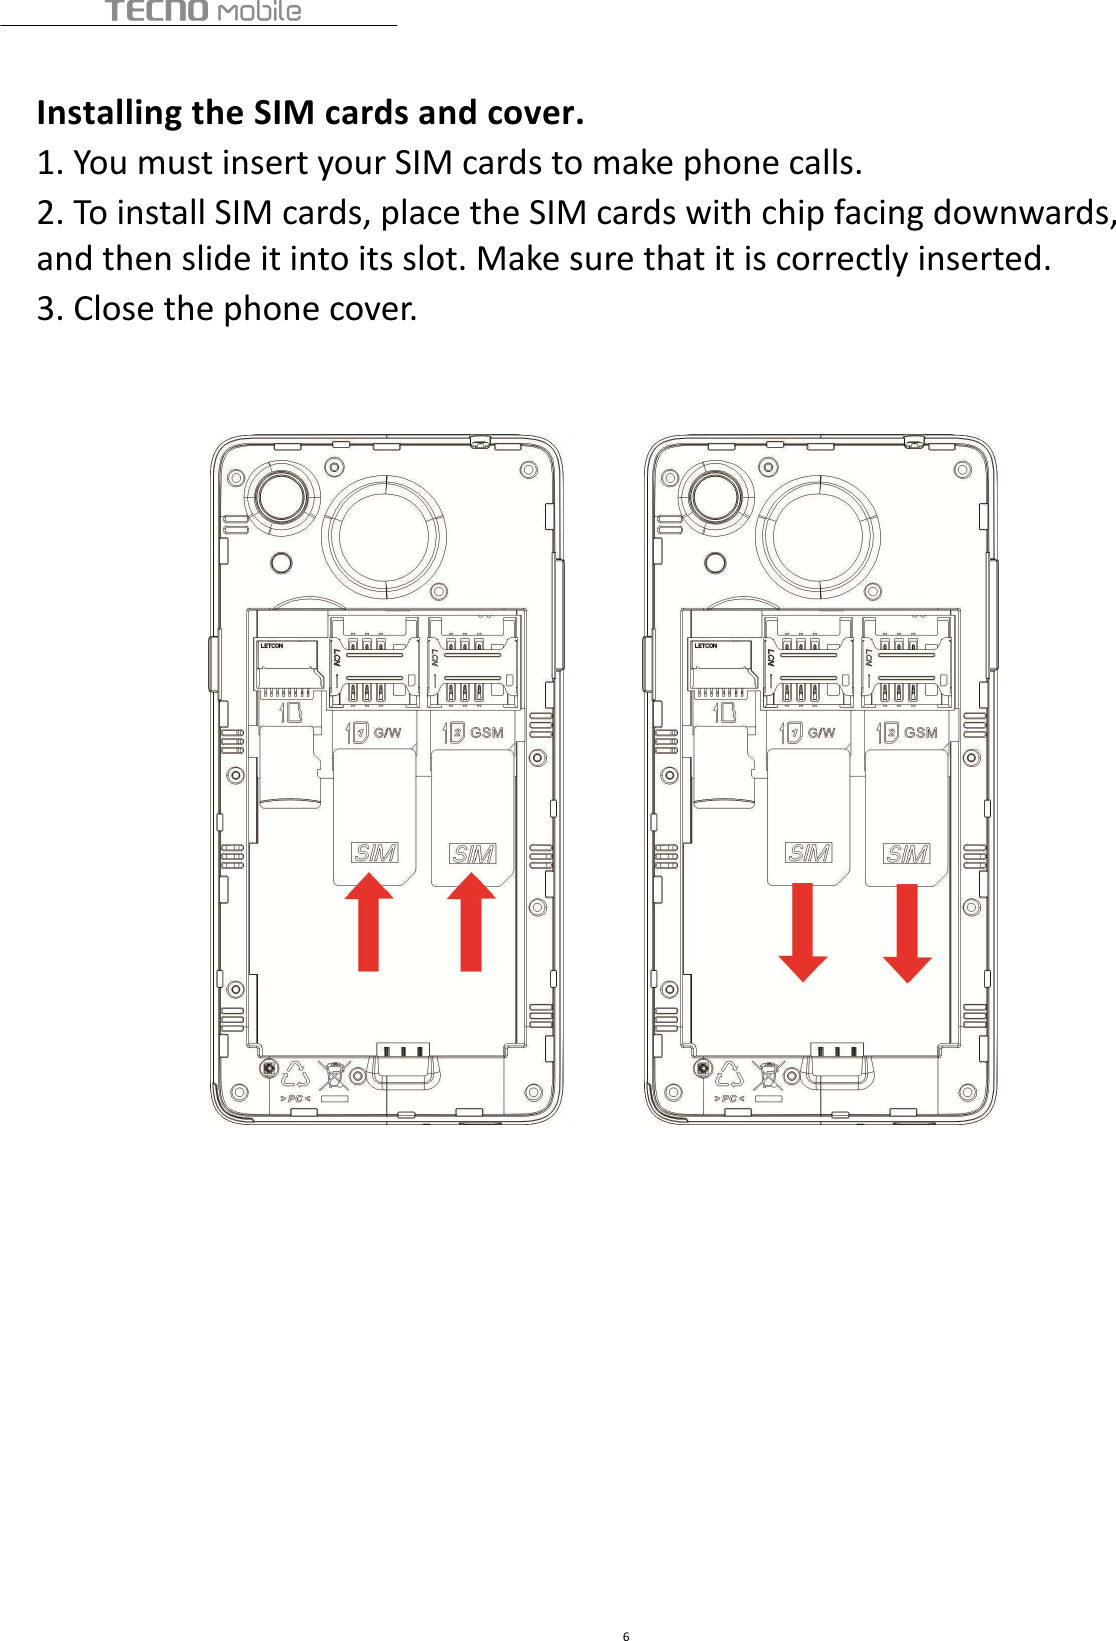  6  Installing the SIM cards and cover. 1. You must insert your SIM cards to make phone calls.   2. To install SIM cards, place the SIM cards with chip facing downwards, and then slide it into its slot. Make sure that it is correctly inserted. 3. Close the phone cover.                                 